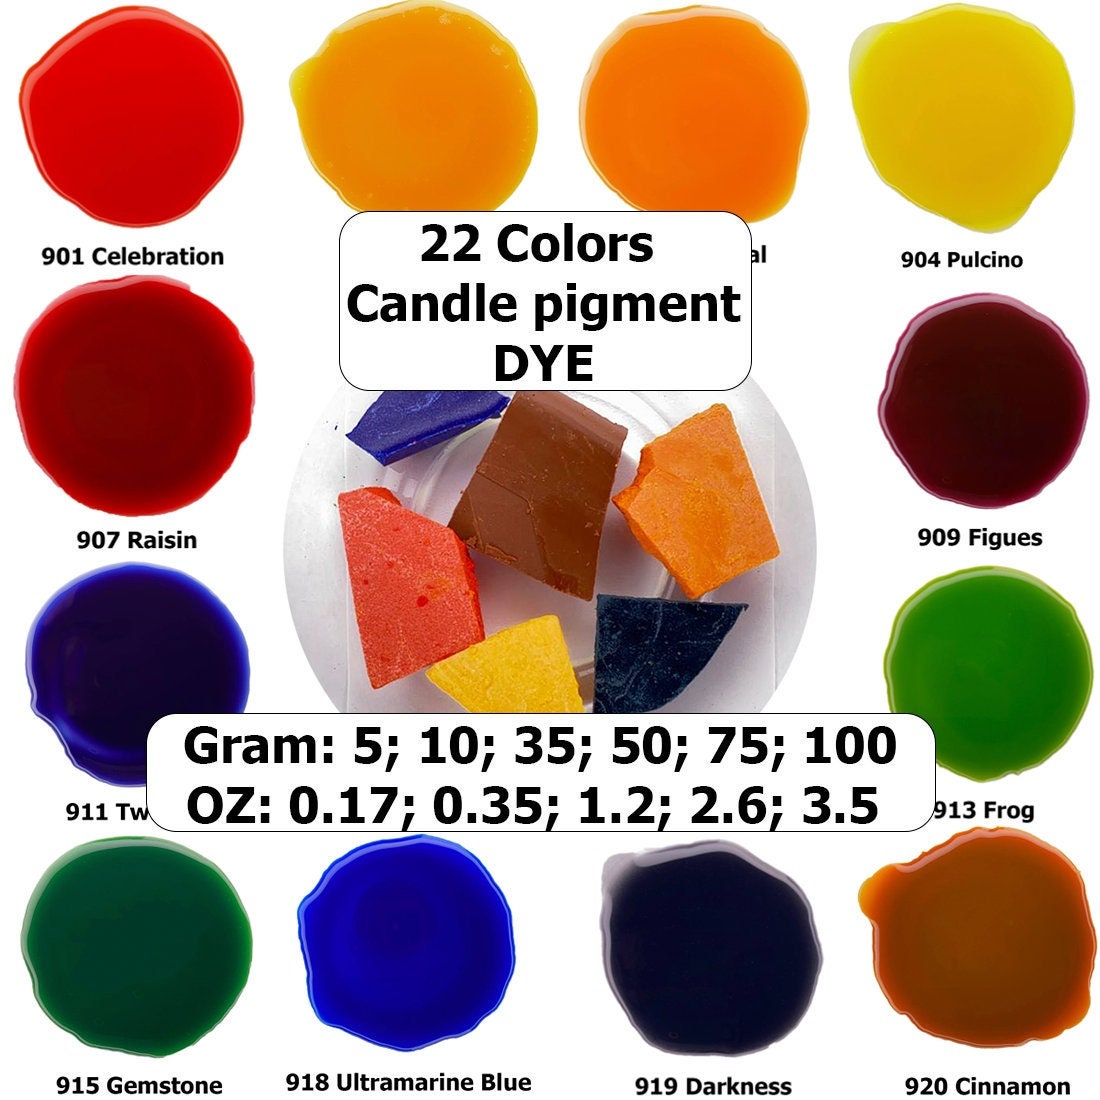 16 Colors Liquid Candle Dye for Candle Making, Pigment for Epoxy Resin, Wax  Liquid Dye, Candle Colorants, Candle Dye Set, Soy Wax Dye 